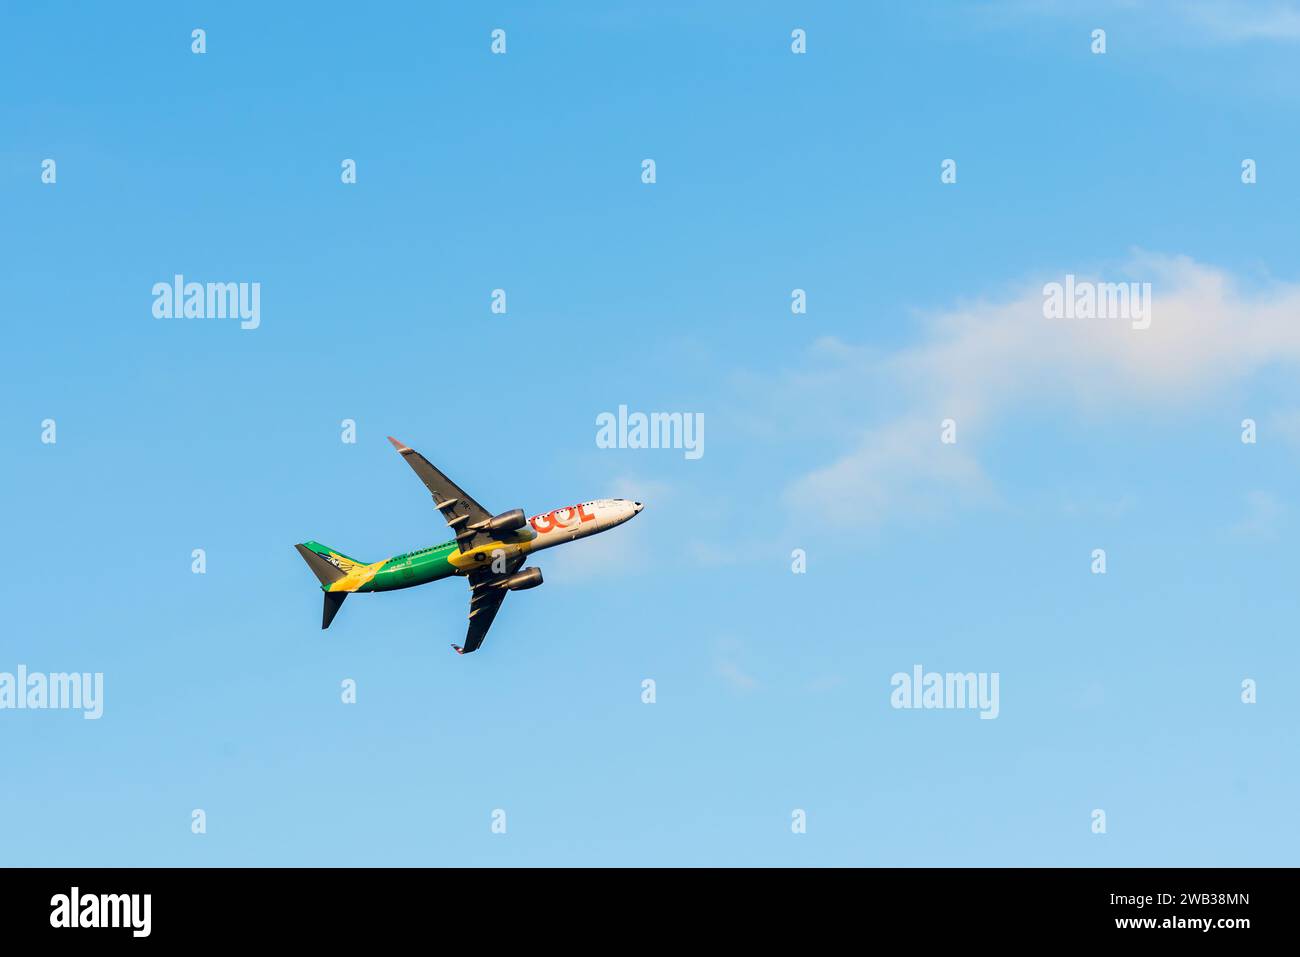 Boeing 737-800 airplane, registration of the Brazilian company Gol Linhas Aereas seconds after taking off at Santos Dumont airport Stock Photo